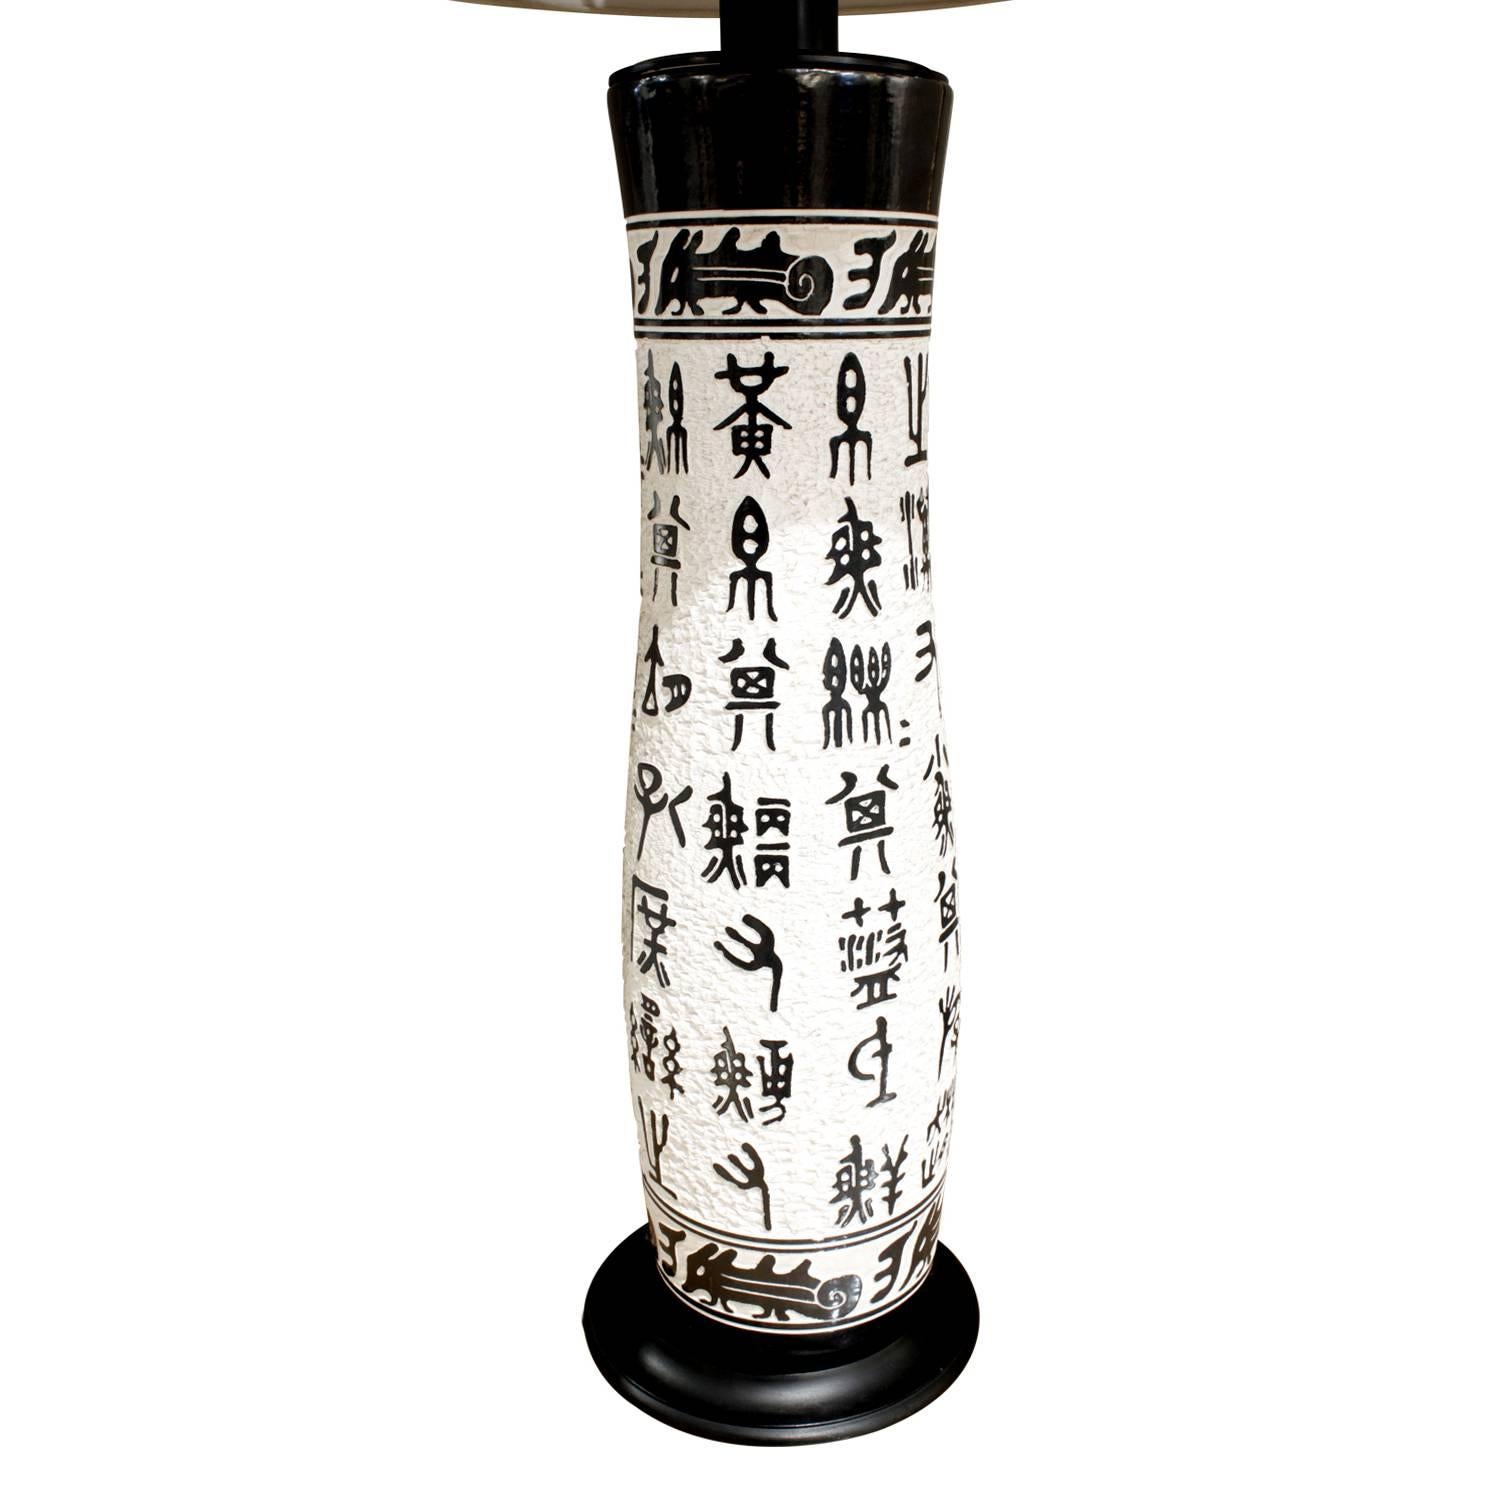 Large studio made ceramic table lamp with Asian style hieroglyphic symbols, Japan, 1960s (signed with maker's mark).